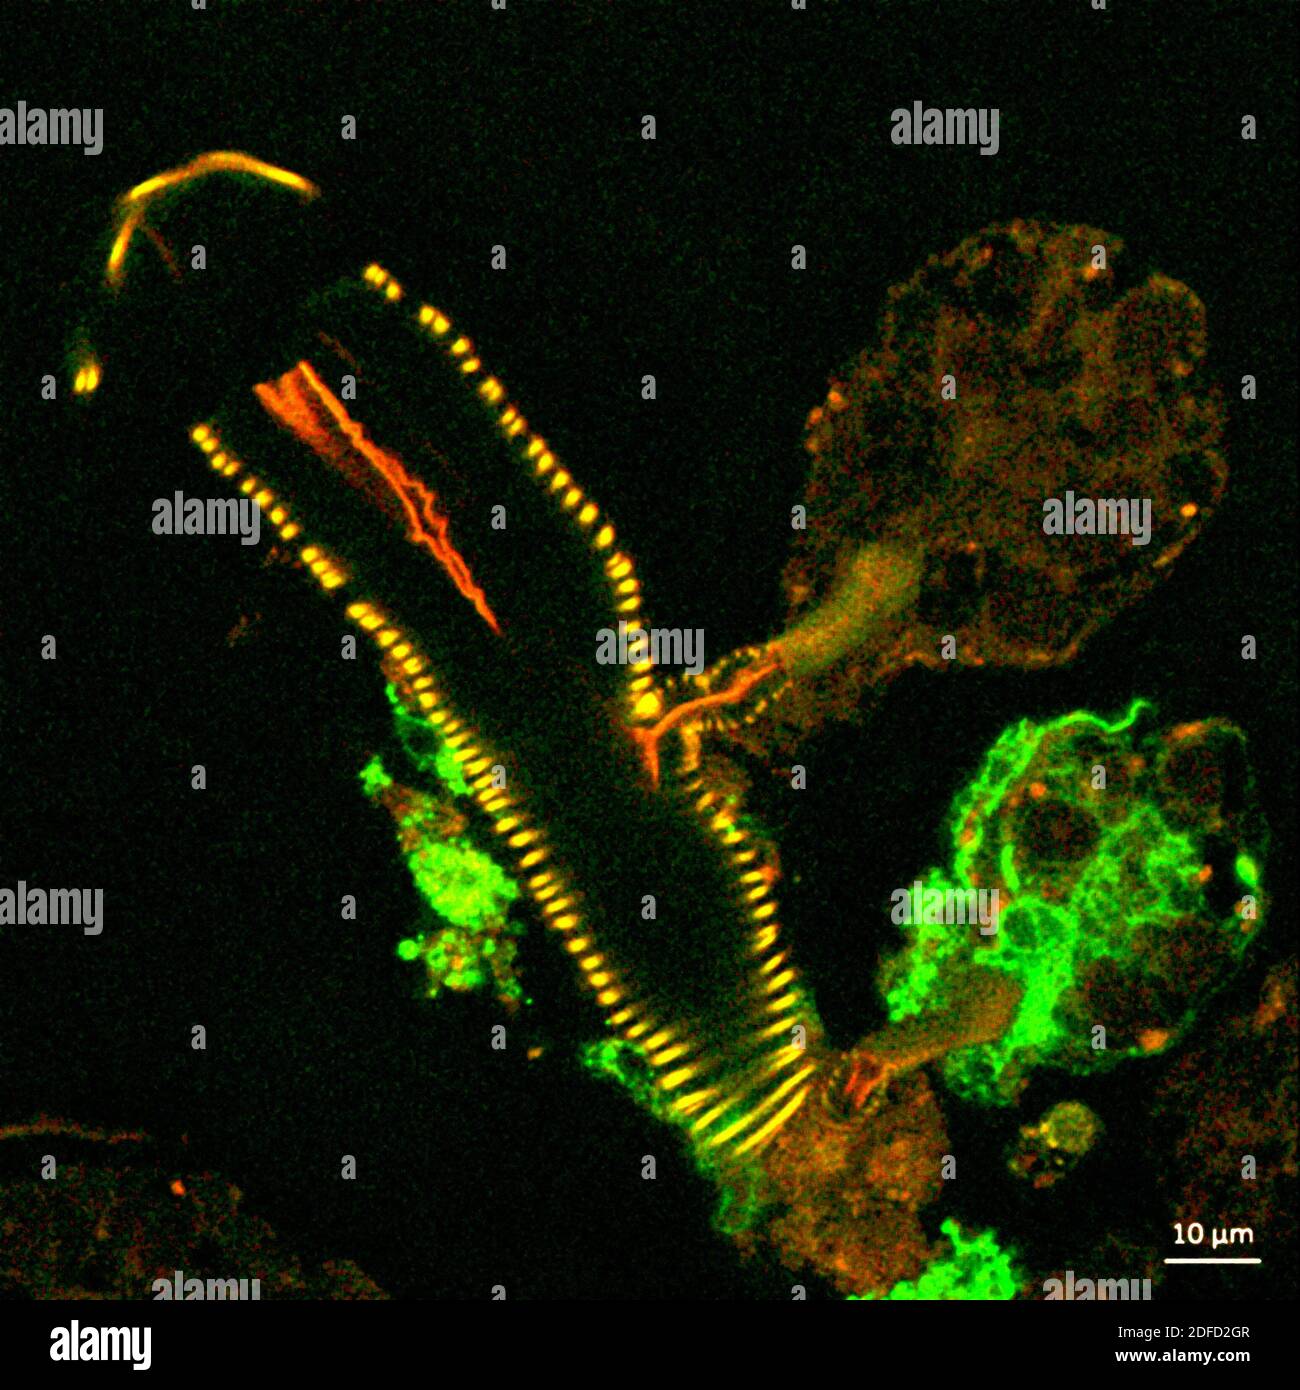 This confocal microscope image shows a cross section of a tick salivary gland infected with Langat virus (green). Two rounded structures on the right, Stock Photo